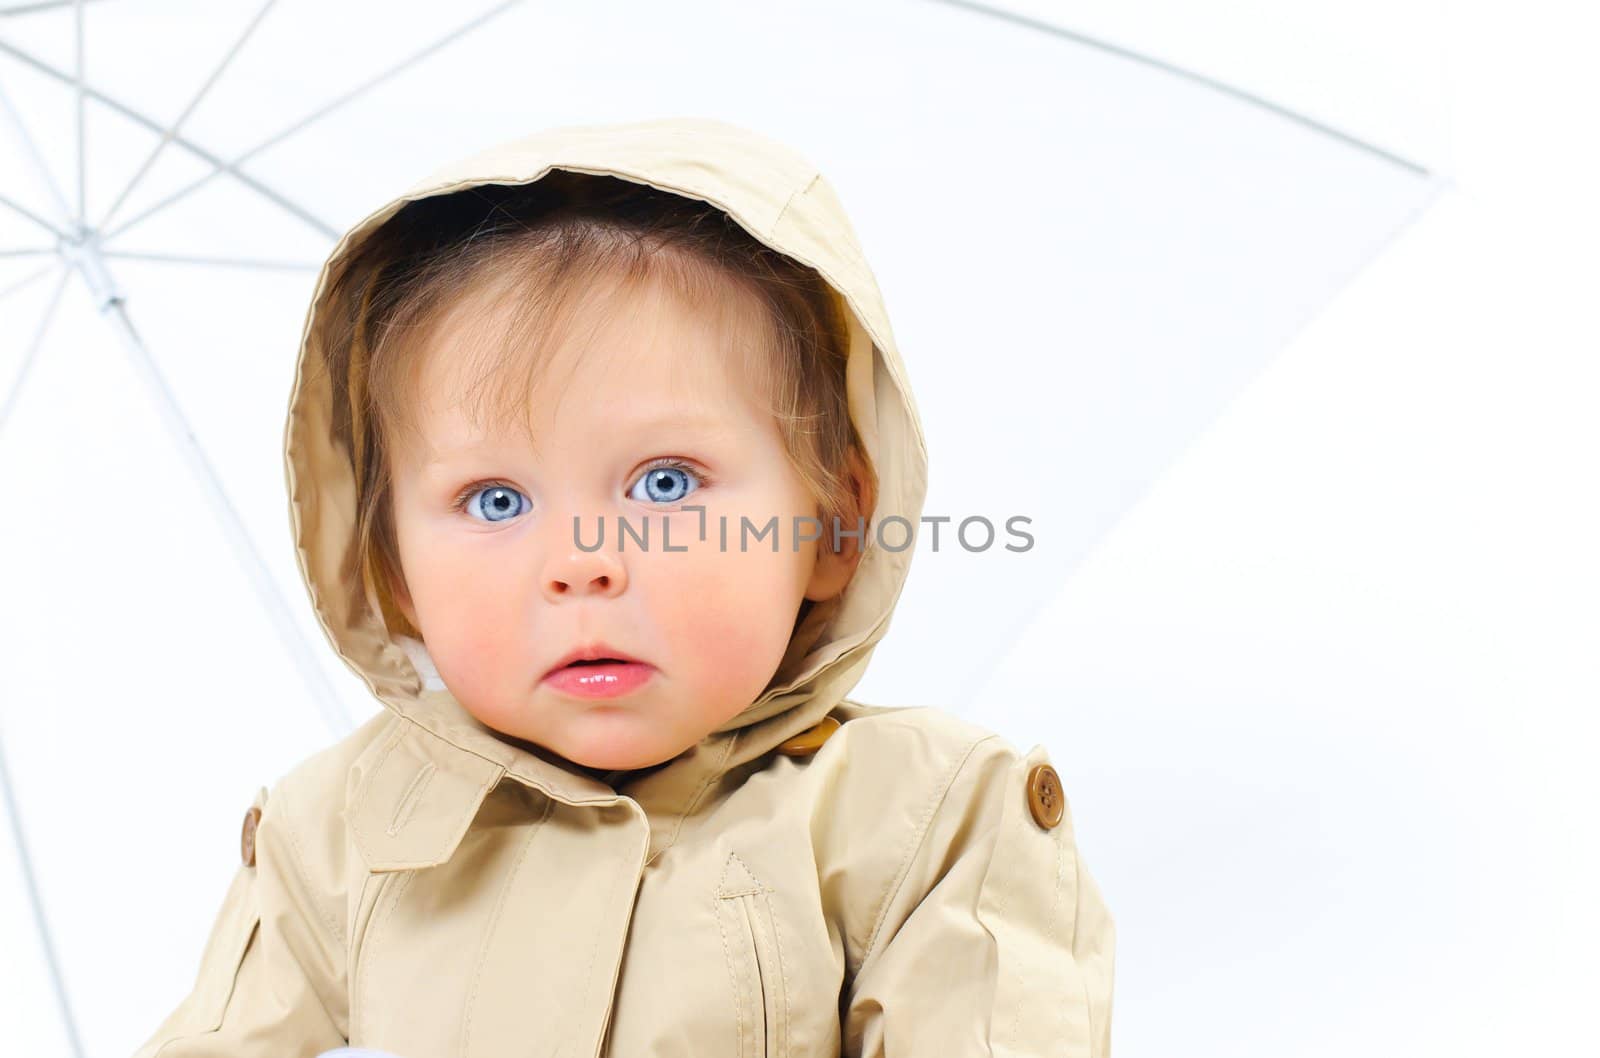 Very Cute Image of a Young baby Girl In hood in the studio